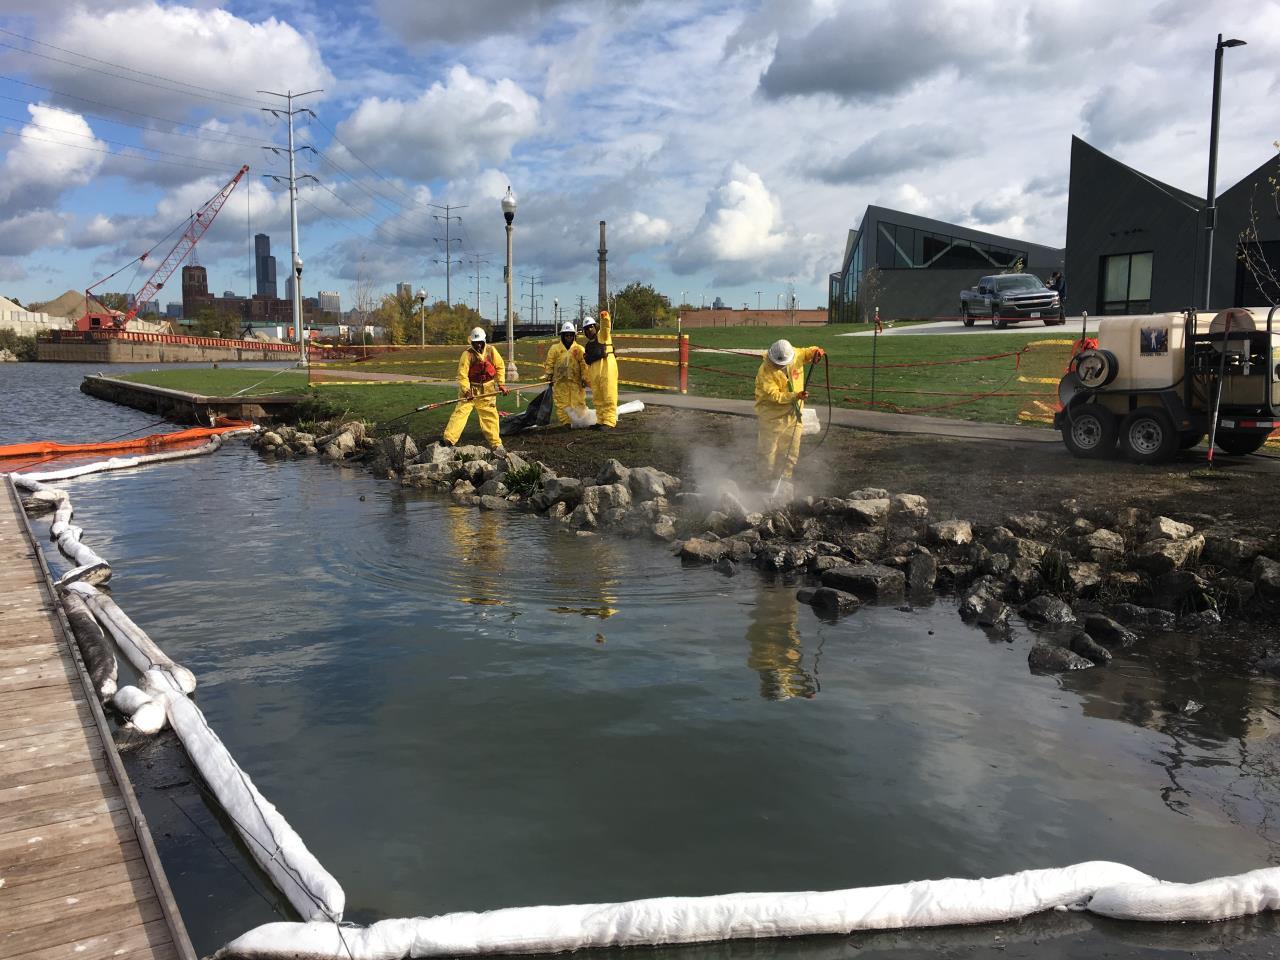 Workers from the Environmental Protection Agency respond to an oil spill that was reported Oct. 26 at a fork of the Chicago River known as Bubbly Creek. (EPA)